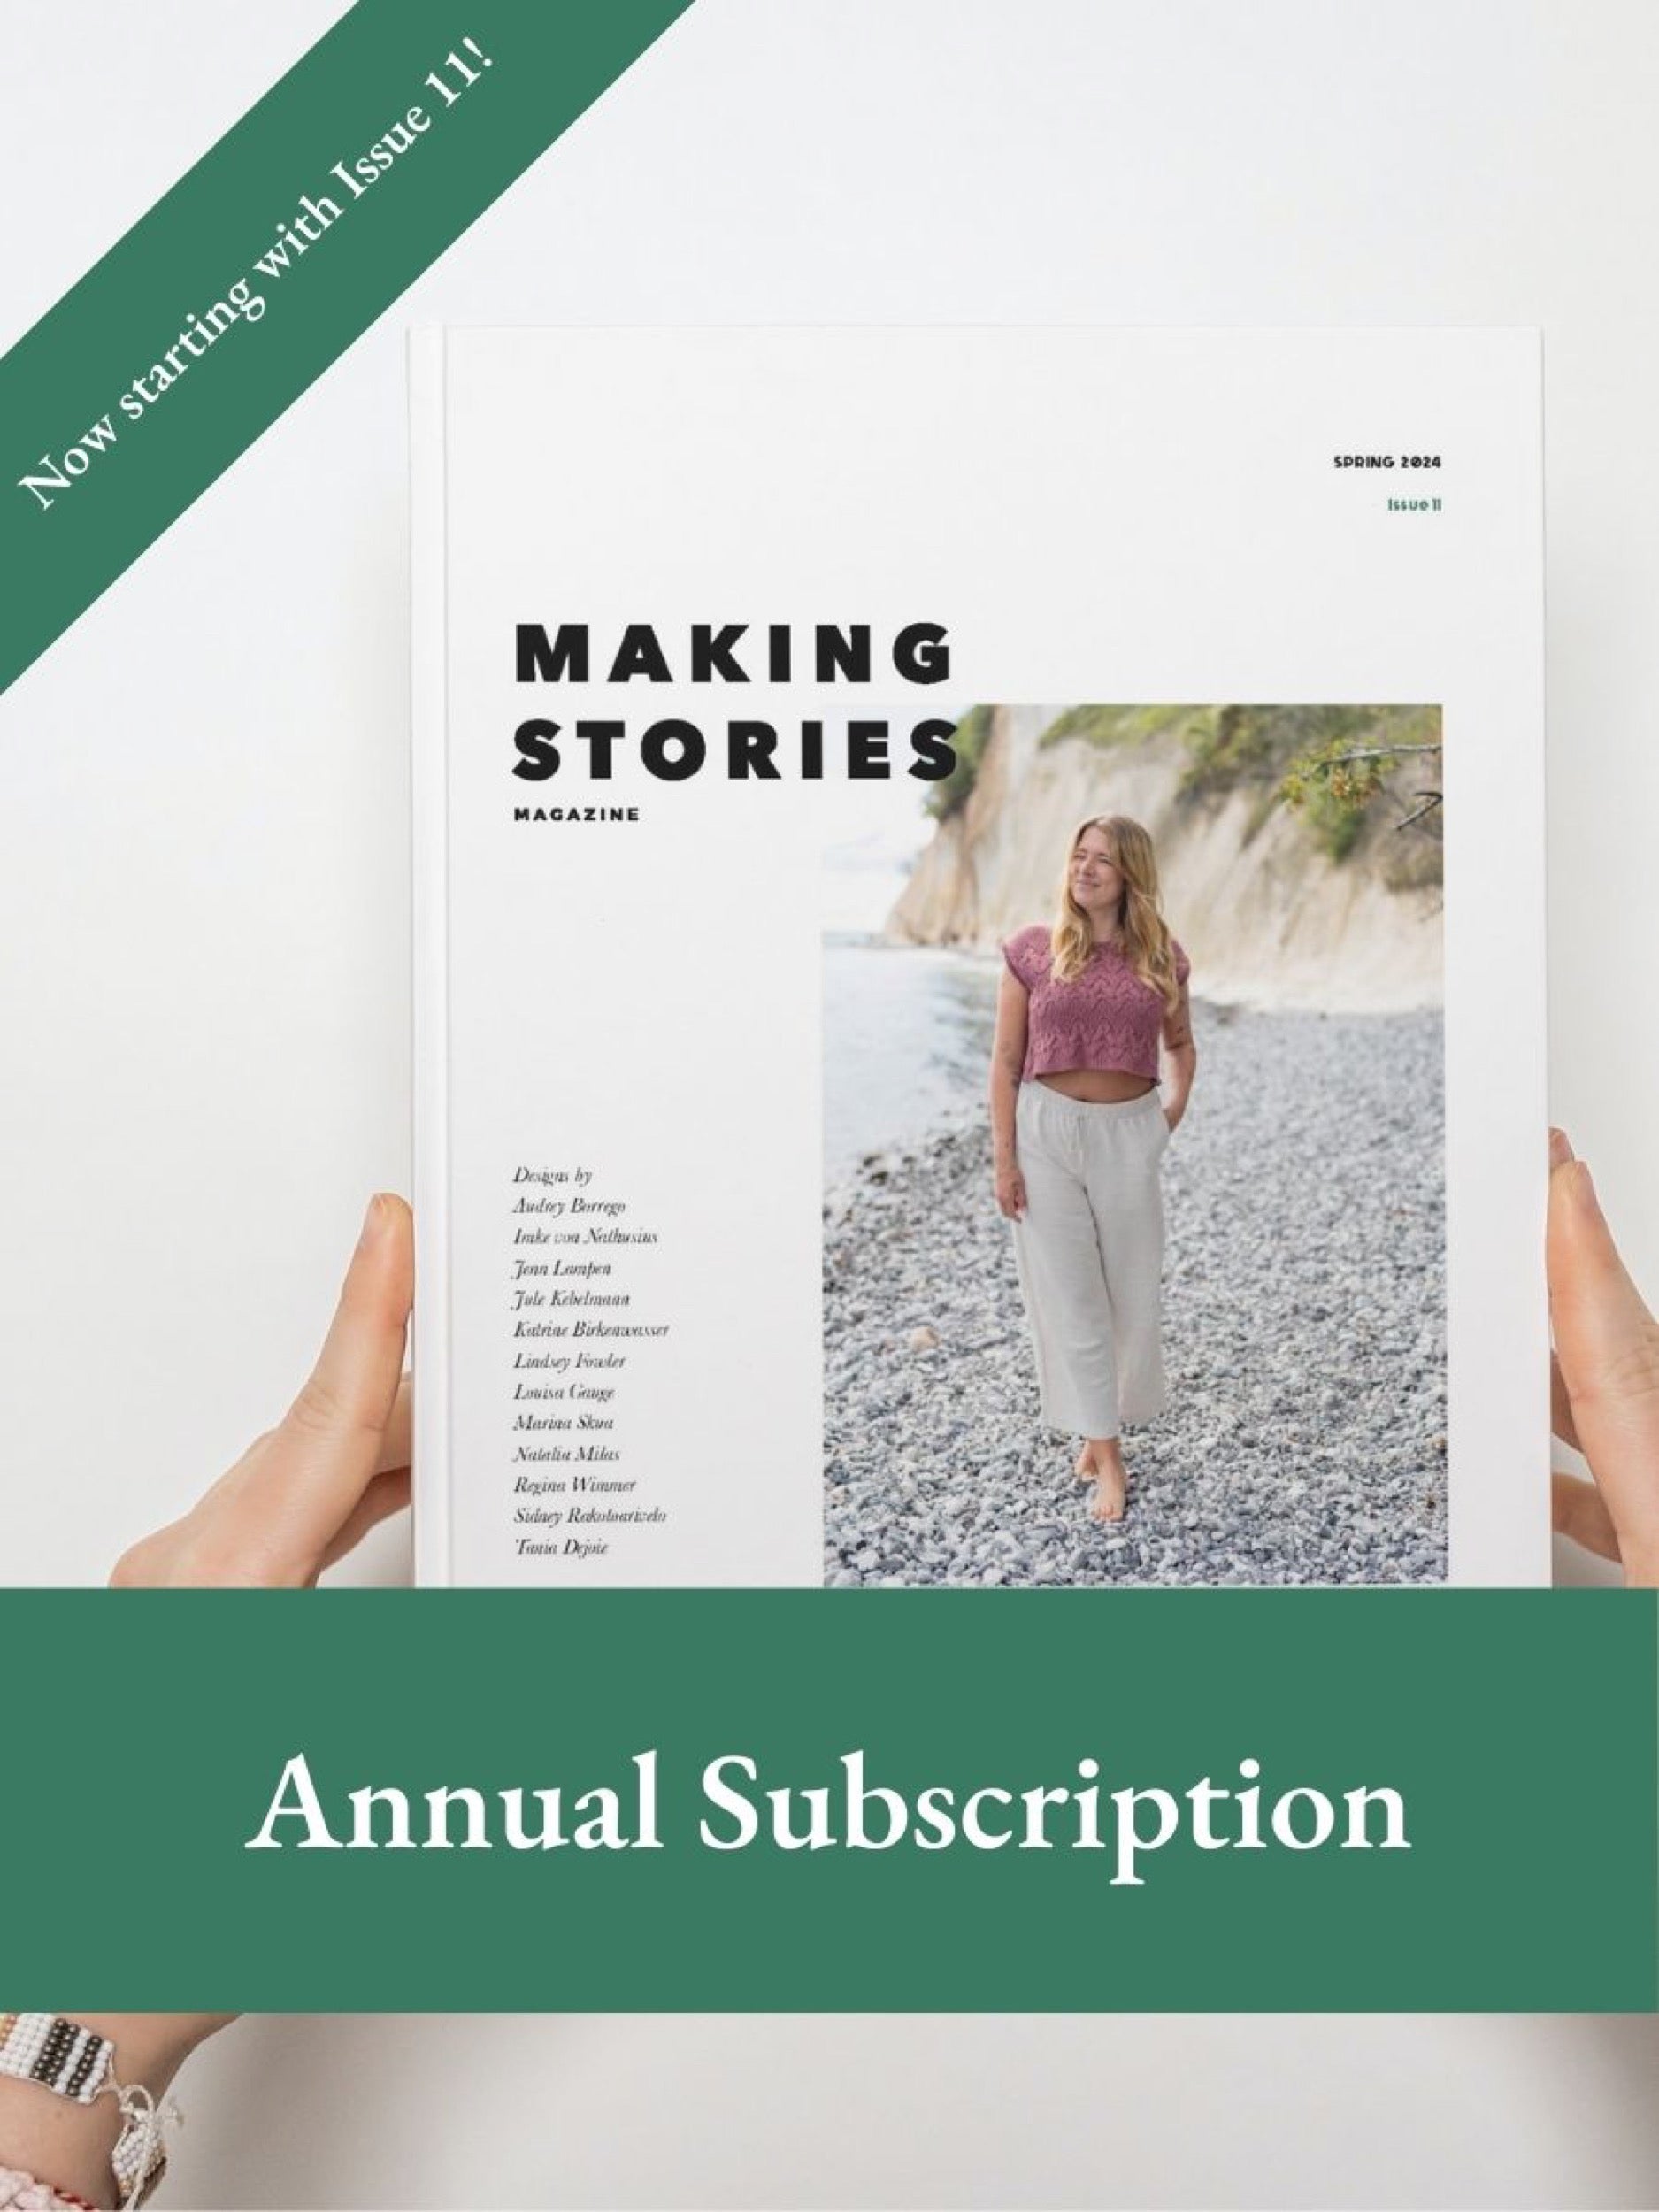 Annual Subscription: Making Stories Magazine (Starting with Issue 11)